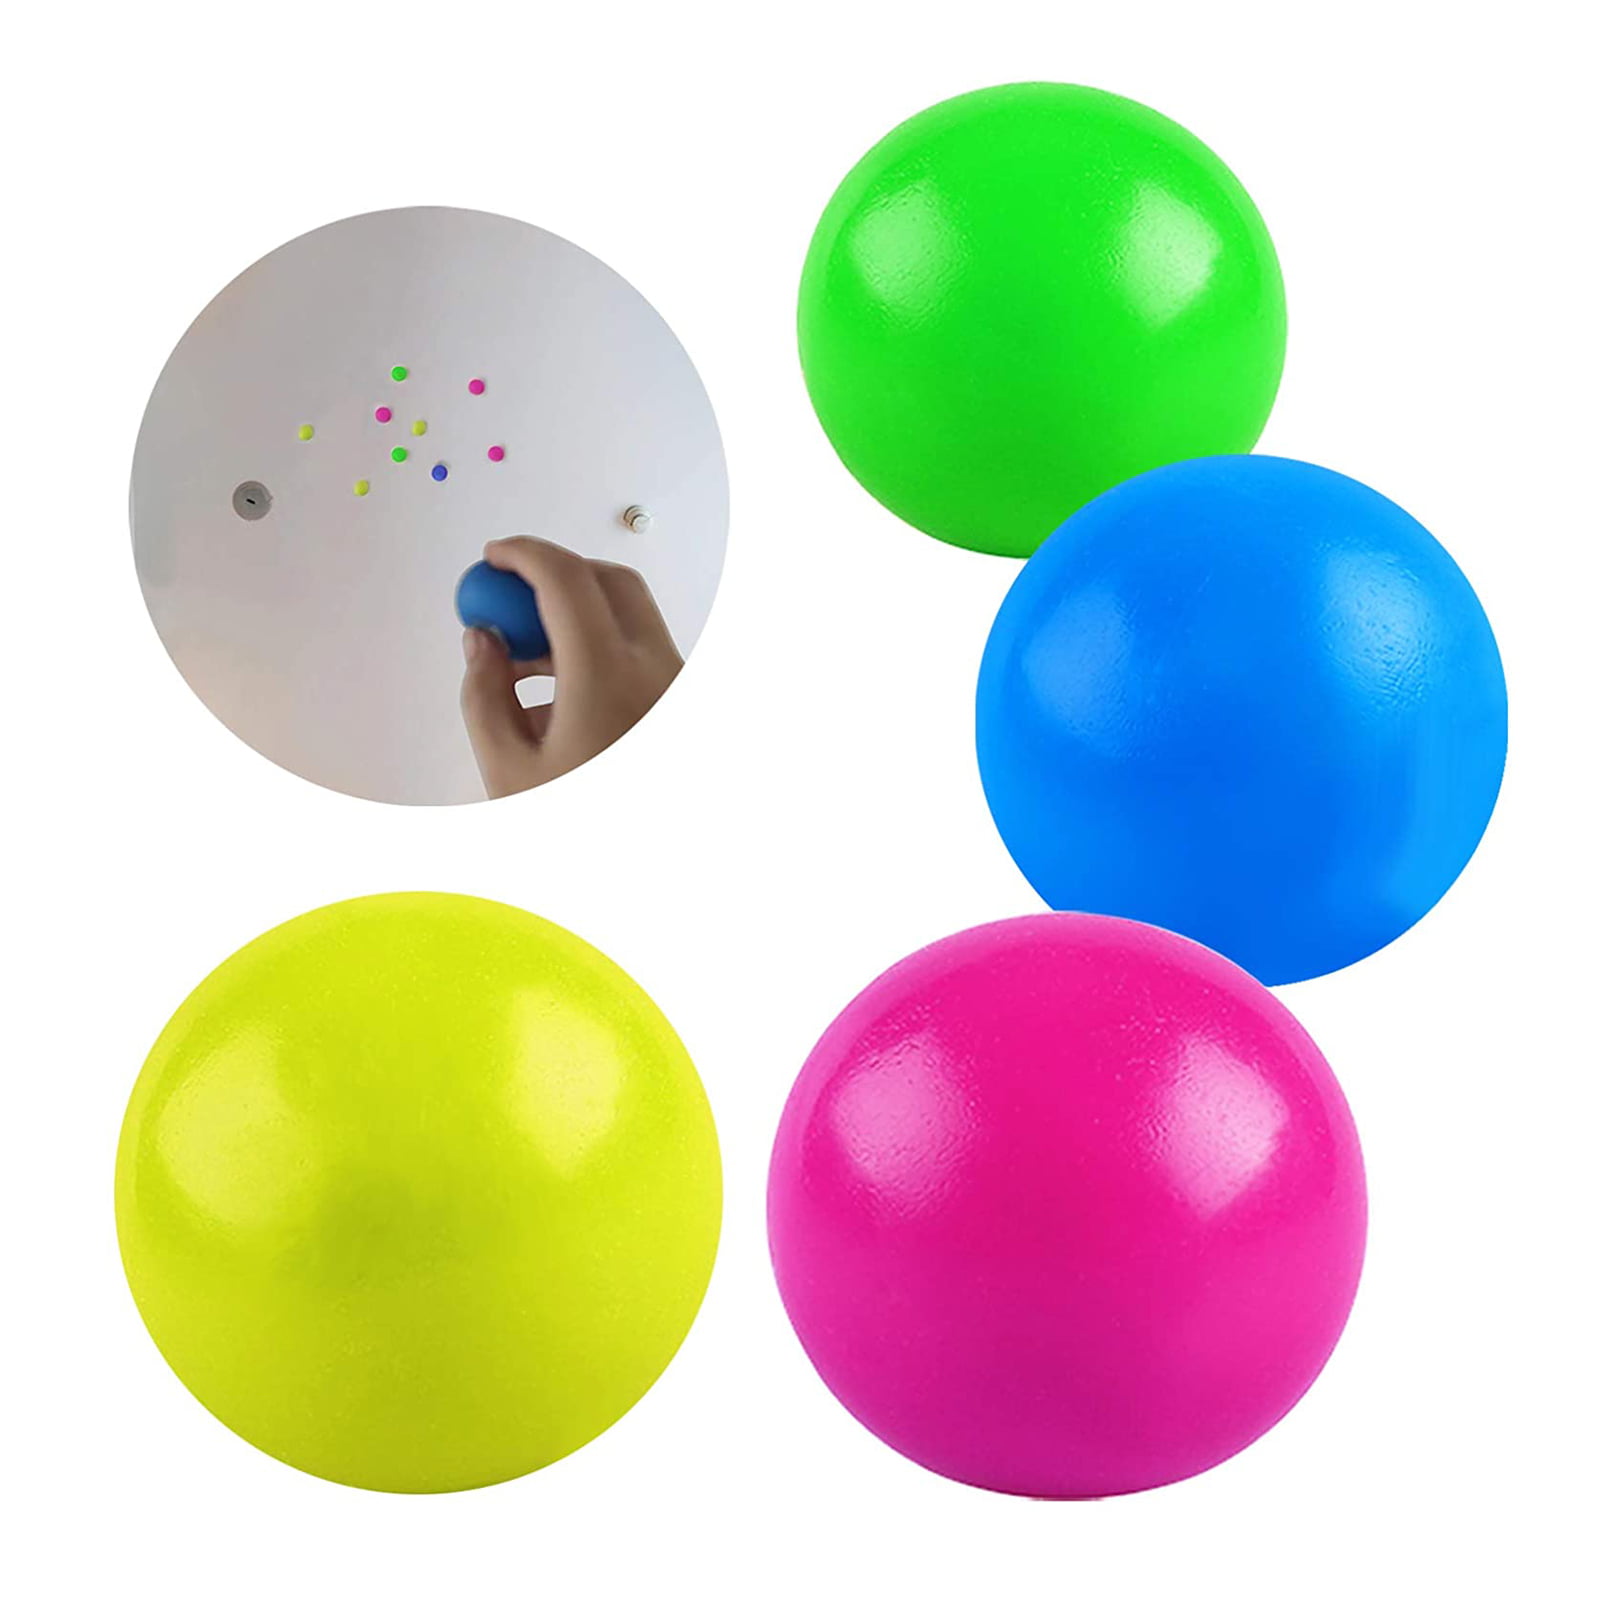 Details about   4pcs Set Glowing Sticky Wall Balls Stress Reliever Toy Squeeze Luminous Kids Toy 